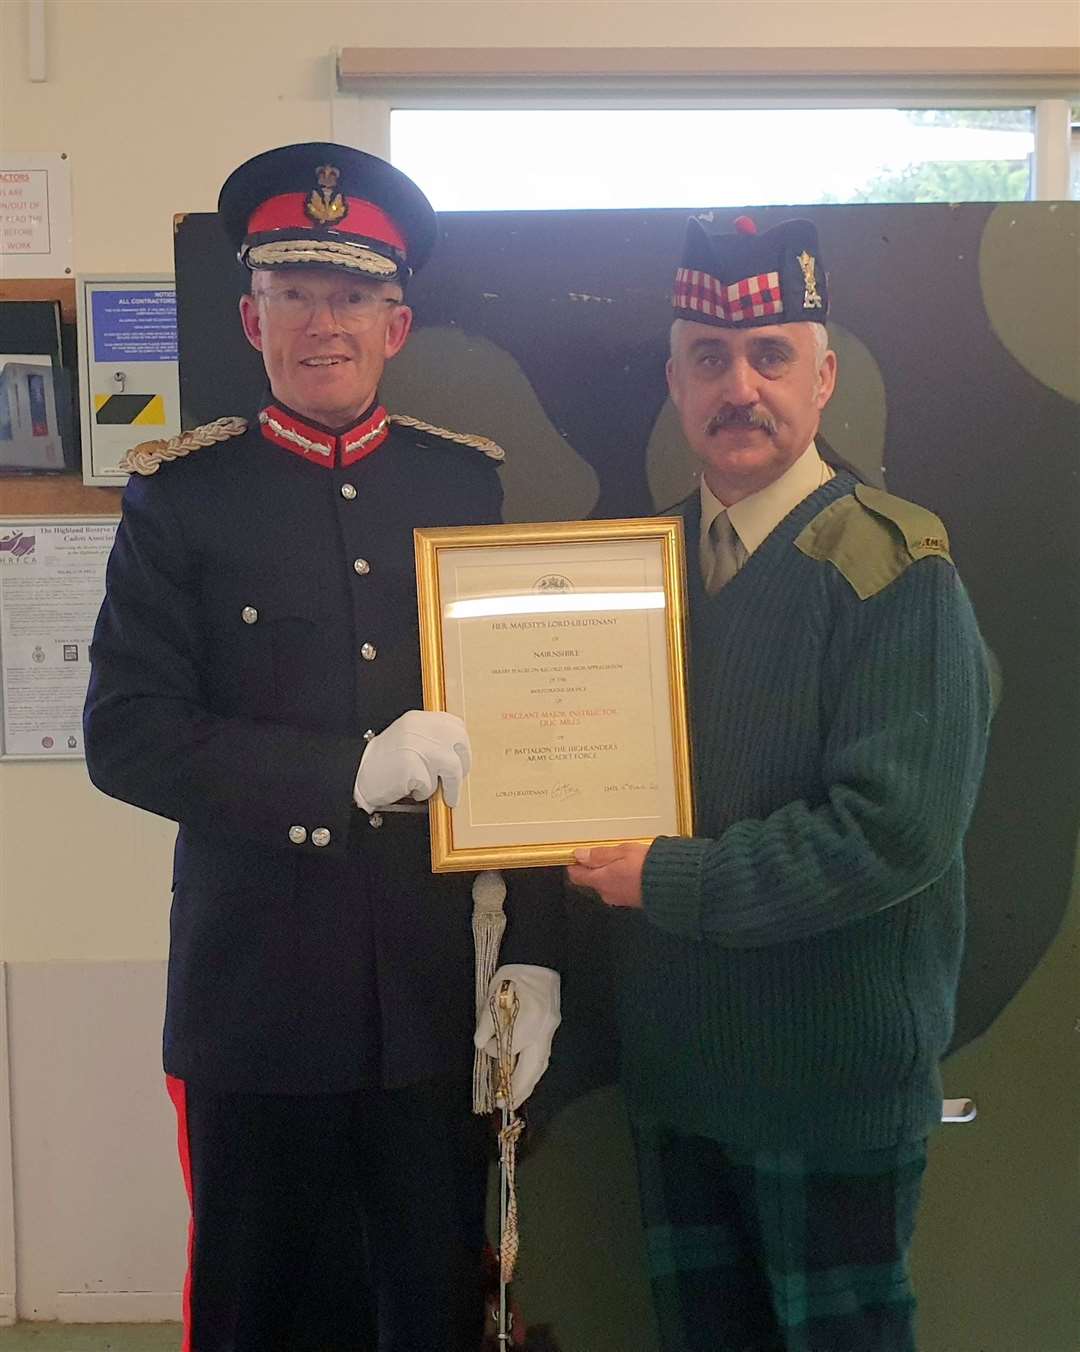 SMI Mills (right) receiving his Lord Lieutenant's Certificate from Mr George Asher, Lord Lieutenant of Nairnshire